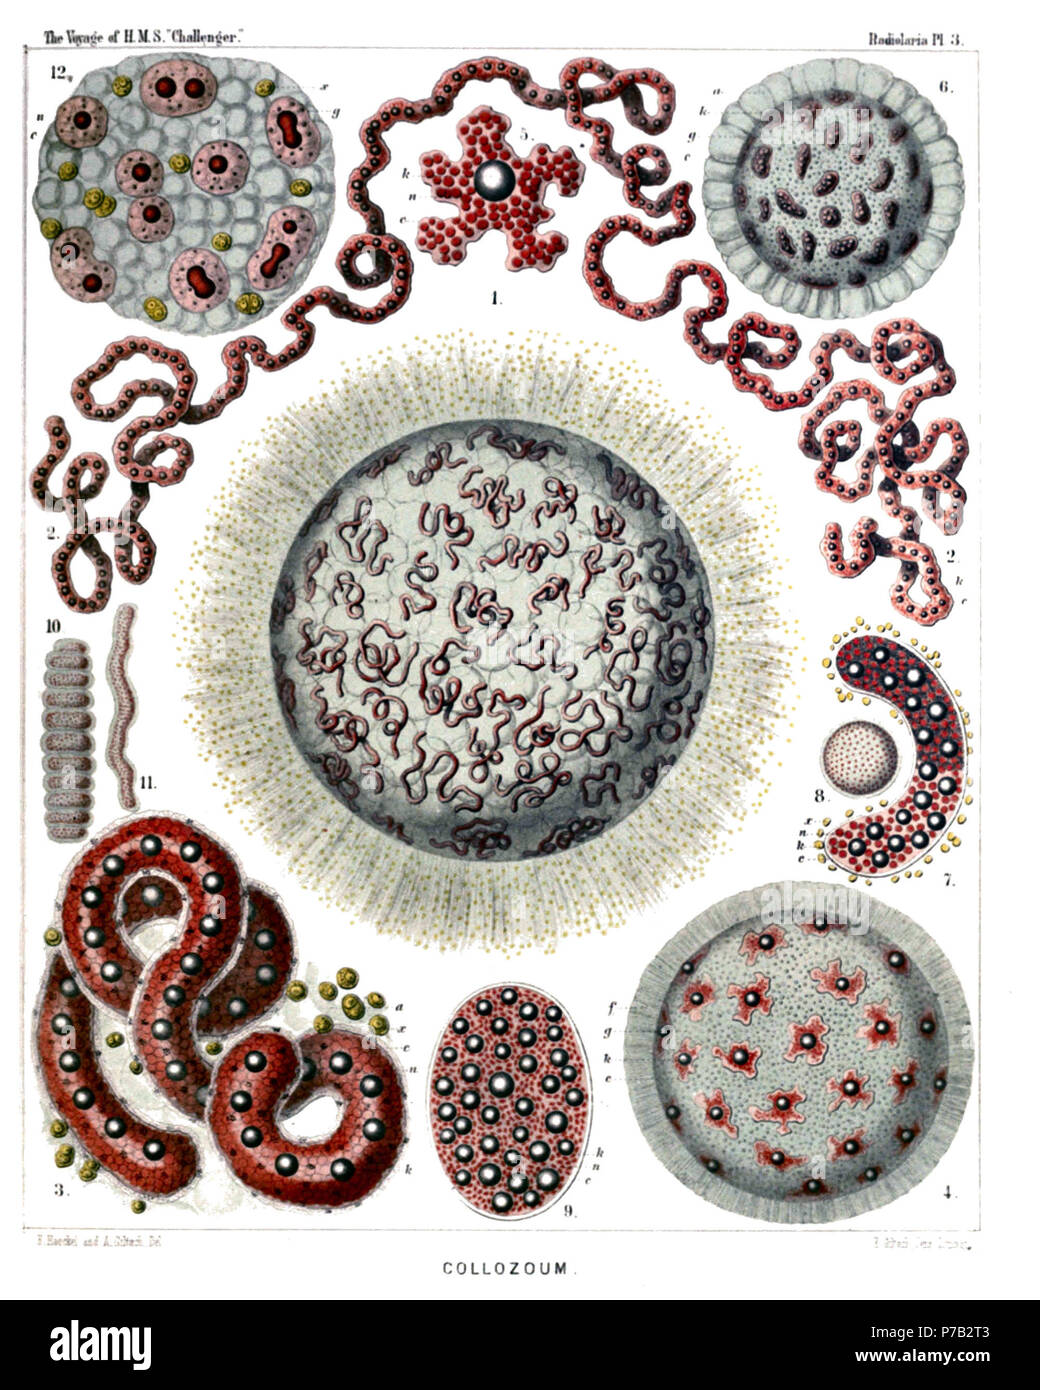 English: Illustration from Report on the Radiolaria collected by H.M.S. Challenger during the years 1873-1876. Part III. Original description follows:  Plate 3. Collozoida.  Diam.  Fig. 1. Collozoum serpentinum, n sp (vel Collophidium serpentinum, Hkl), × 10  A living cœnobium, with expanded pseudopodia. The spherical calymma (or the common jelly-mass of the colony) is alveolate and contains numerous cylindrical, serpentine, central capsules. Numerous yellow cells or xanthellæ are scattered between the radial pseudopodia in the periphery.  Fig. 2. Collozoum serpentinum, n. sp., × 50  An isolat Stock Photo